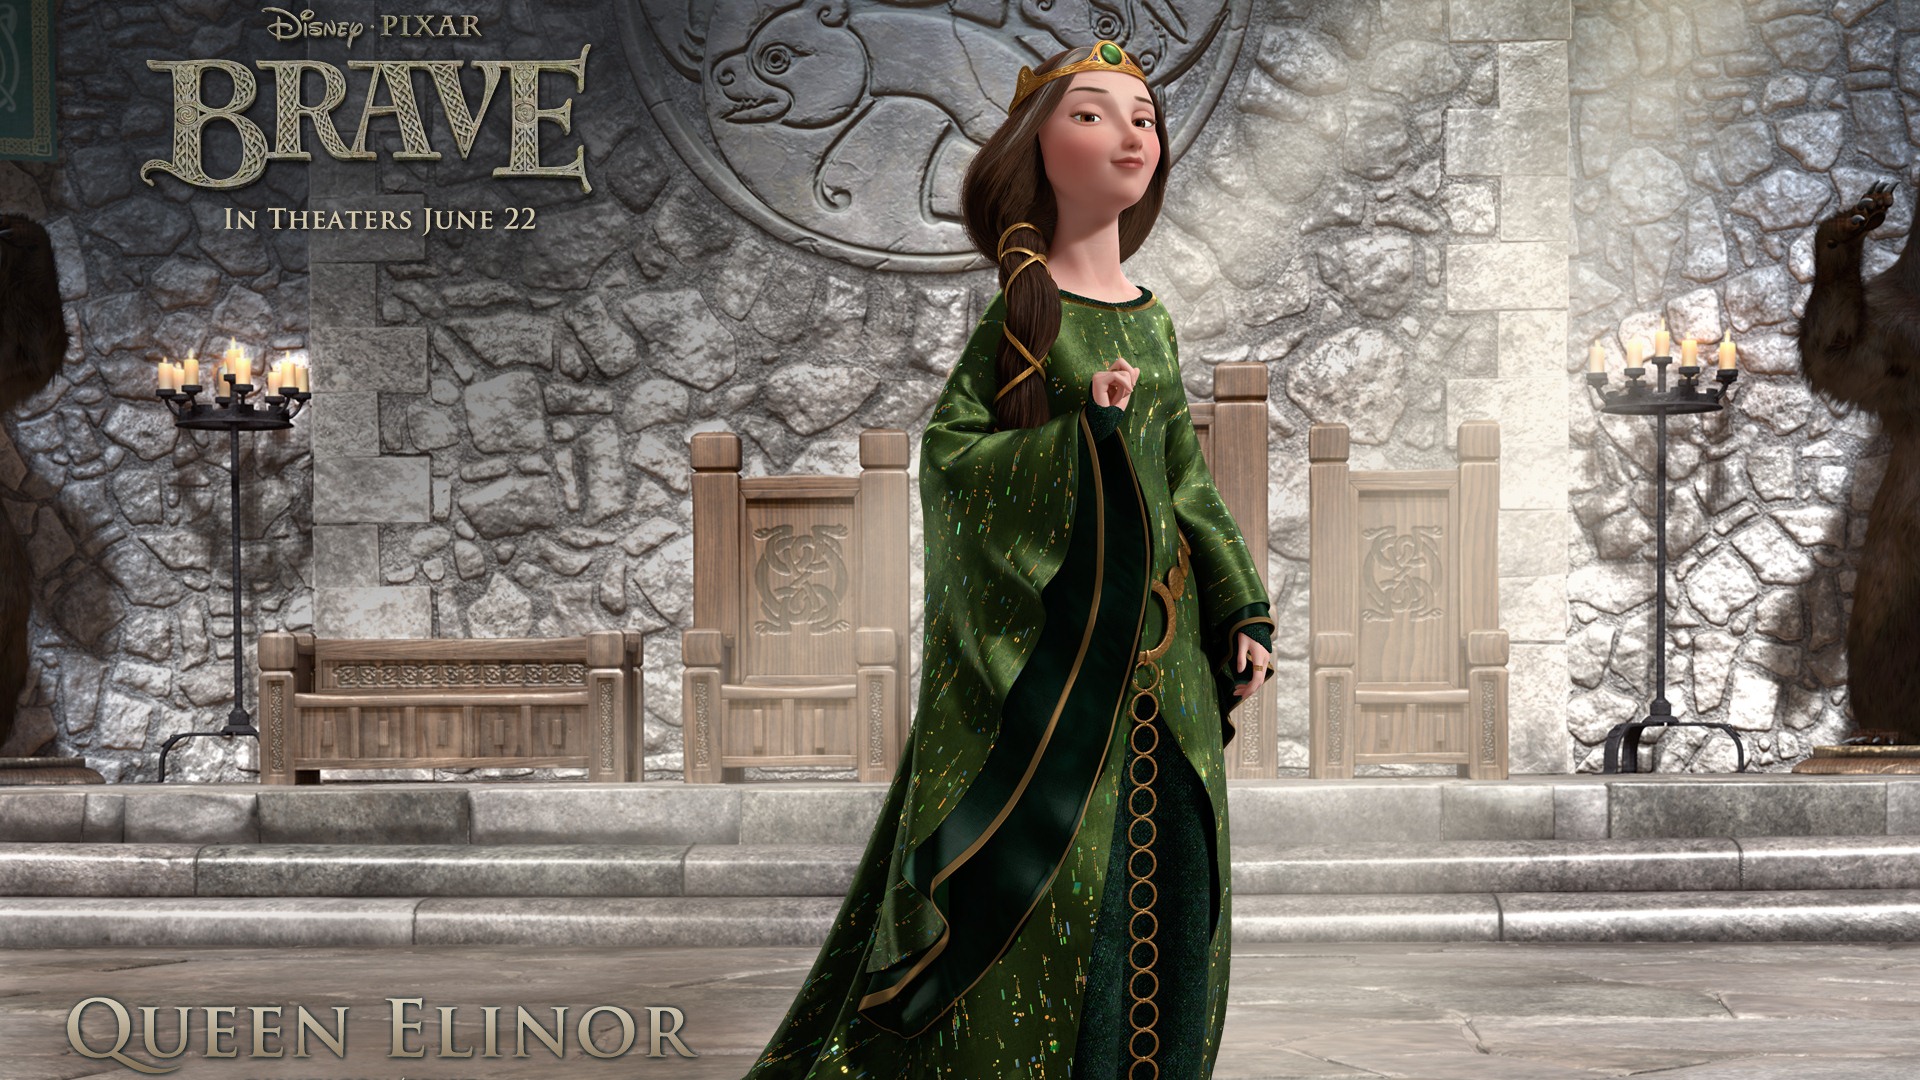 Brave 2012 HD wallpapers #9 - 1920x1080